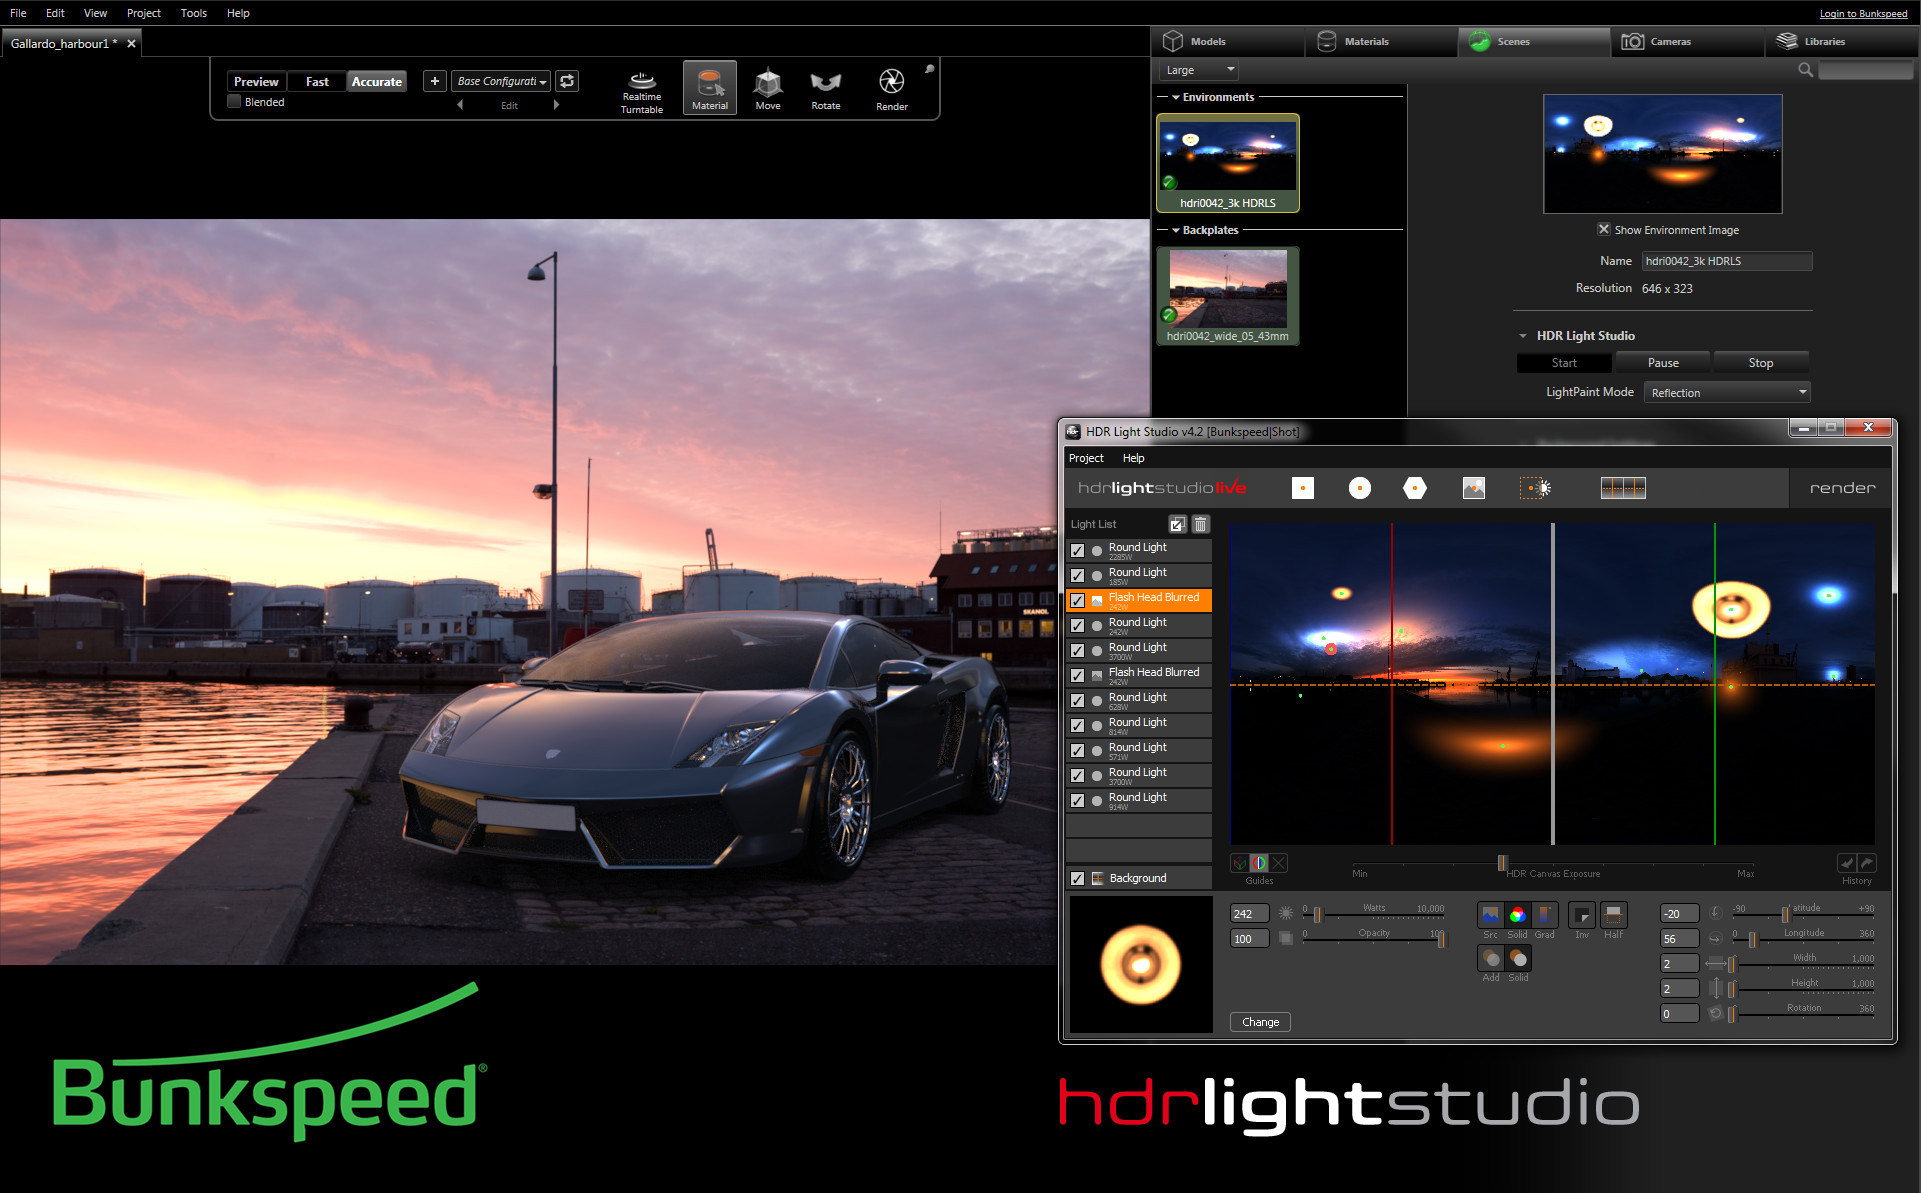 HDR Light Studio 4 adds Live connection for Bunkspeed Products